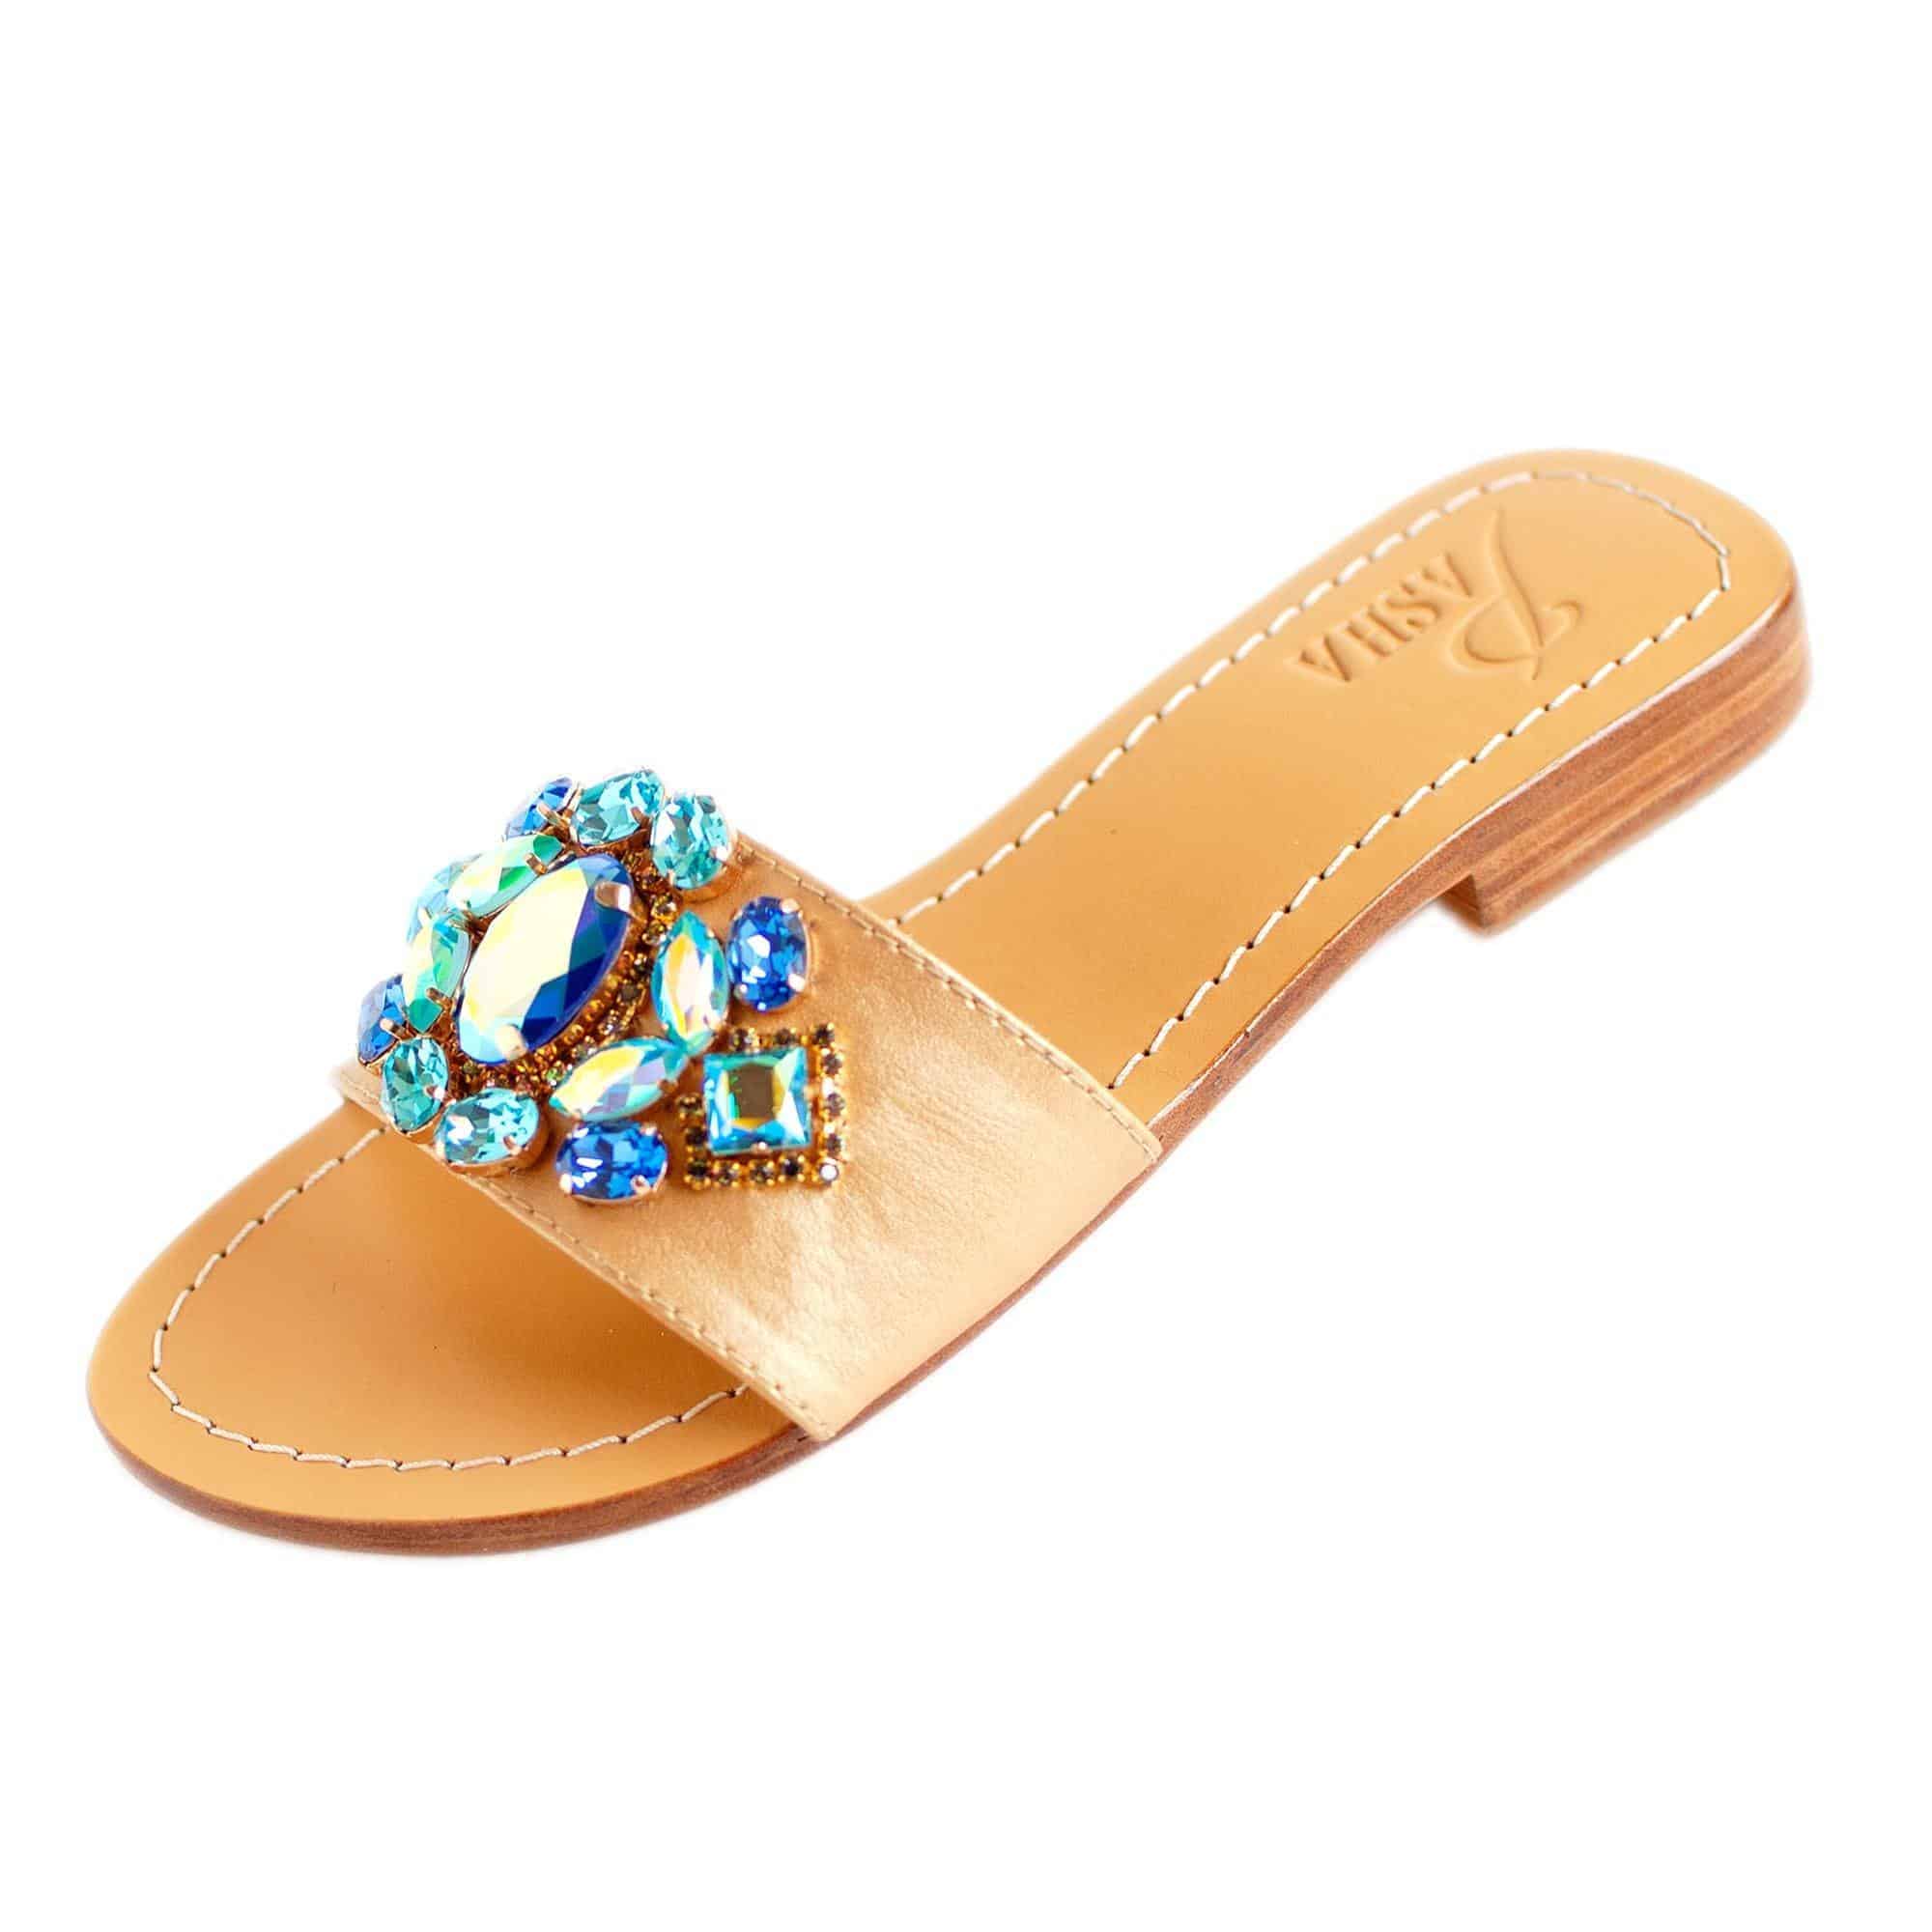 MANTEO - Pasha Sandals - Jewelry for your feet - 